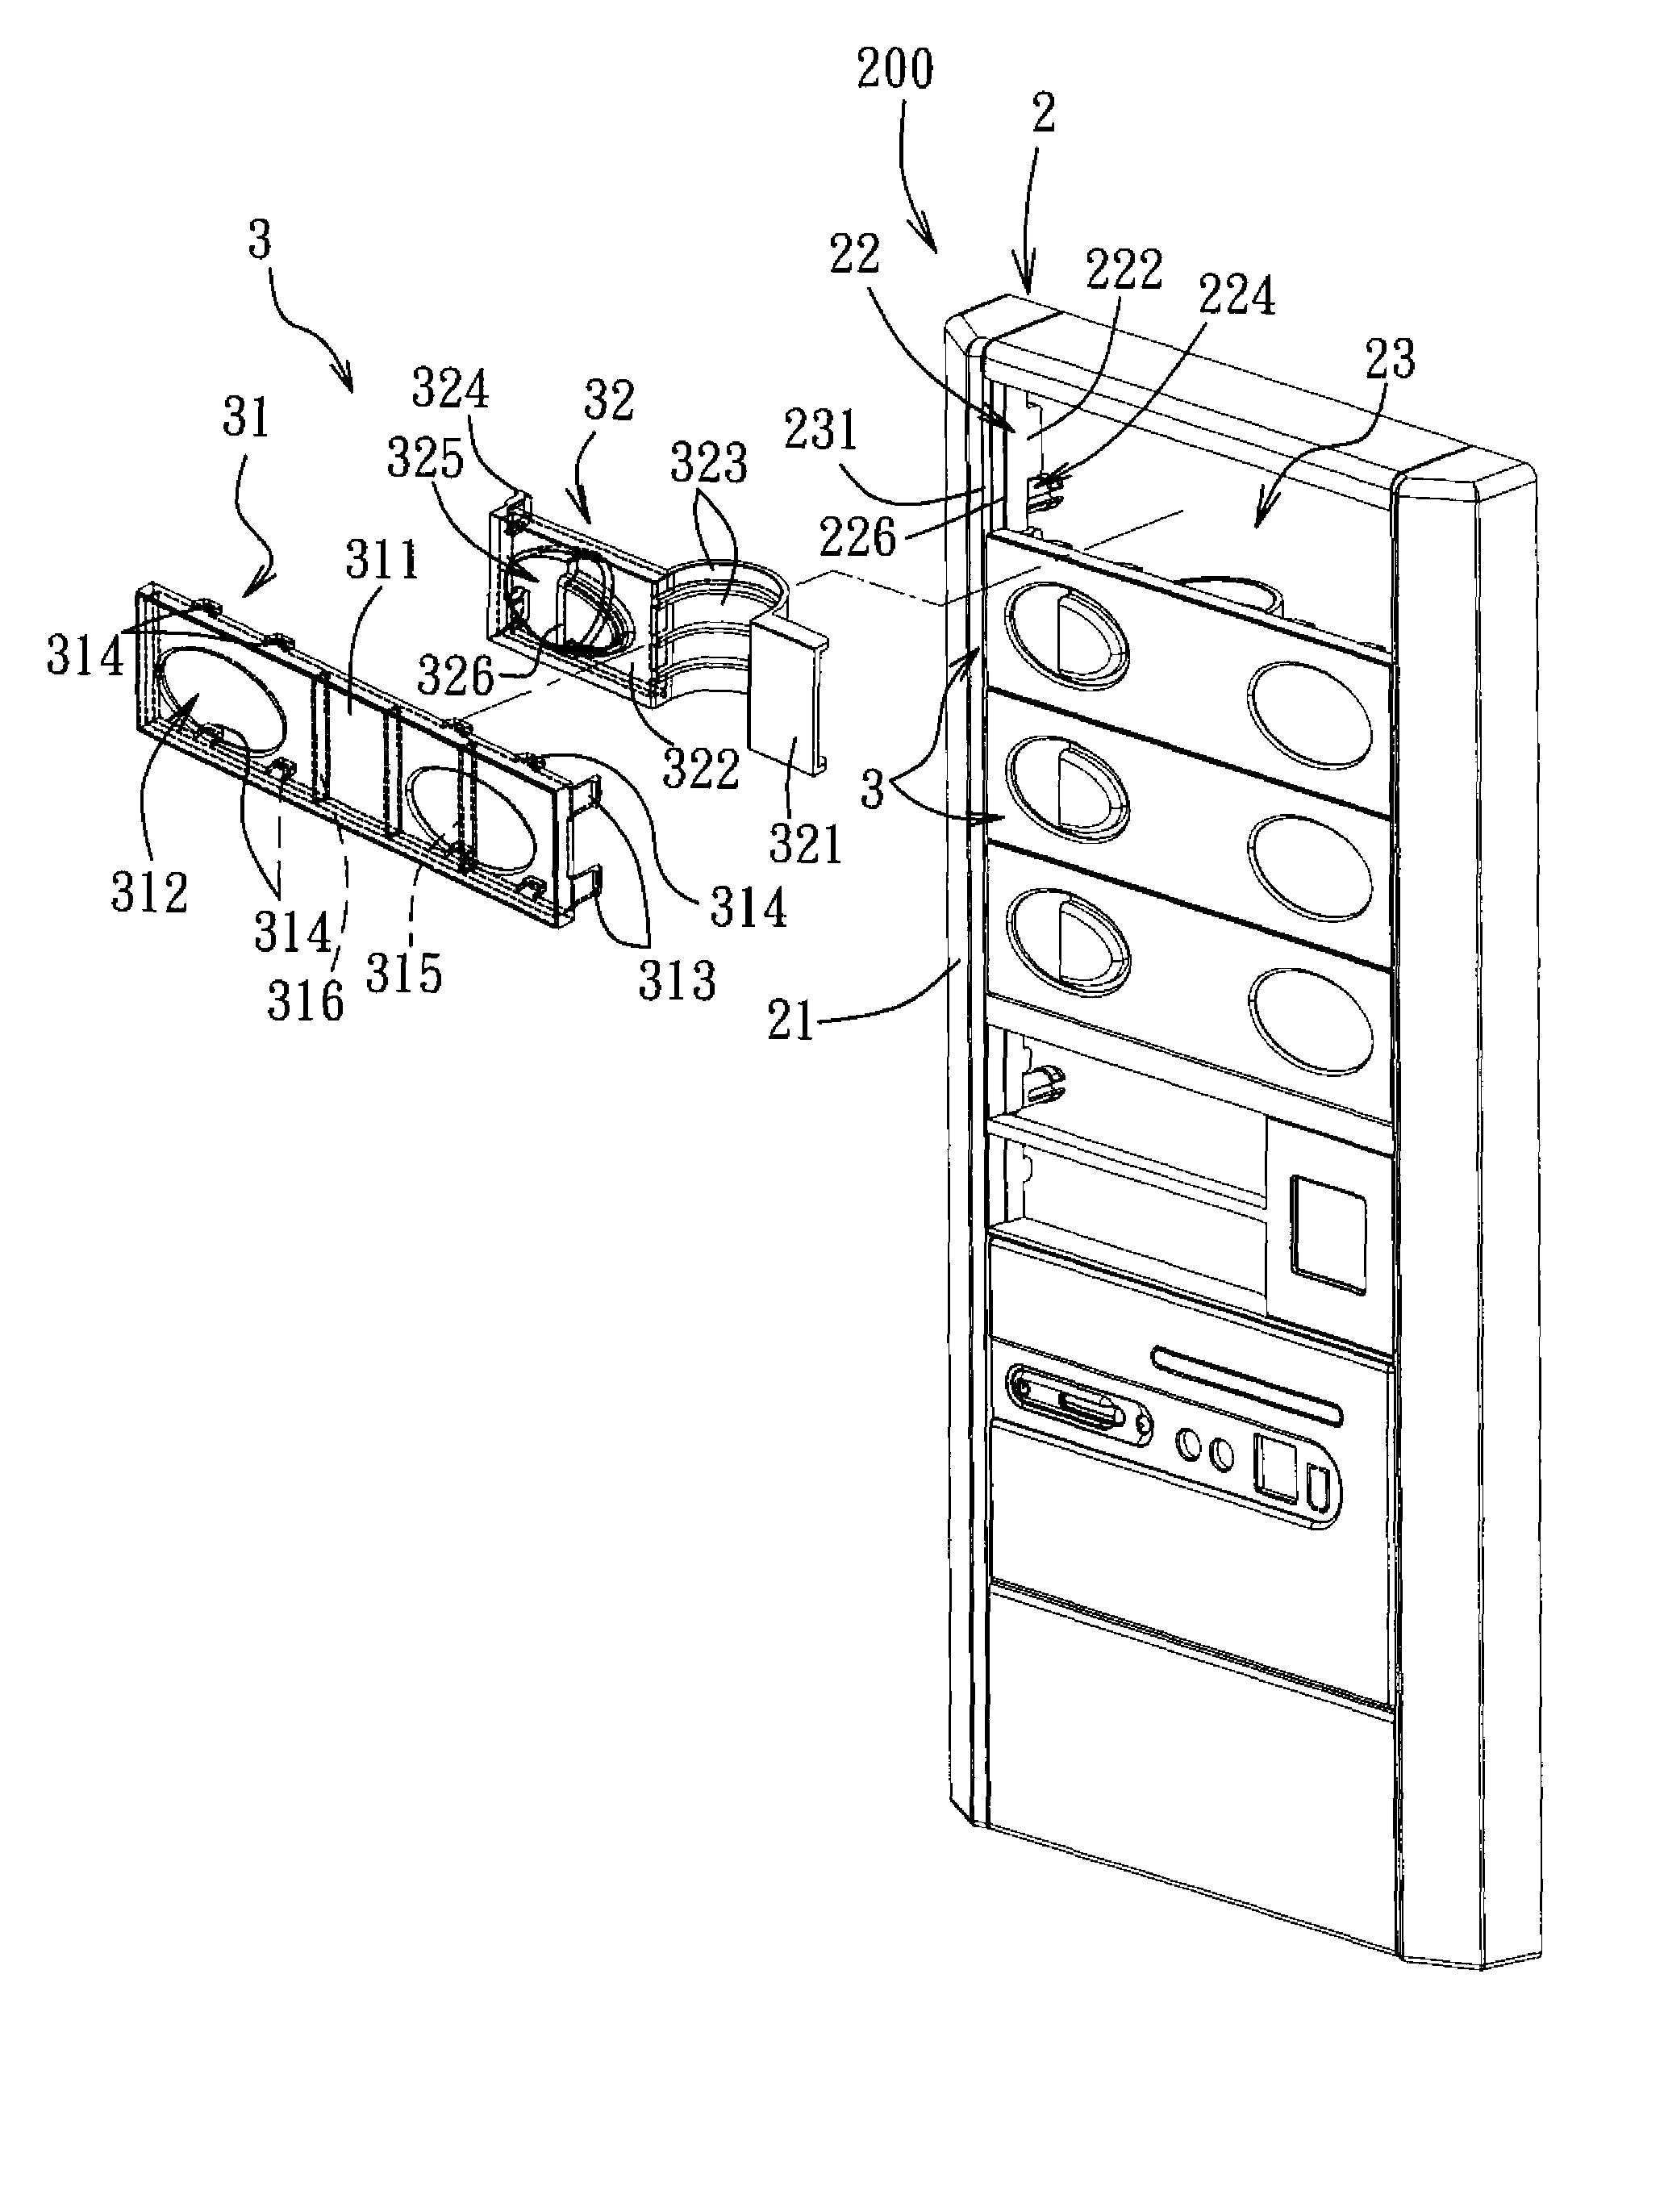 Face panel for a computer housing